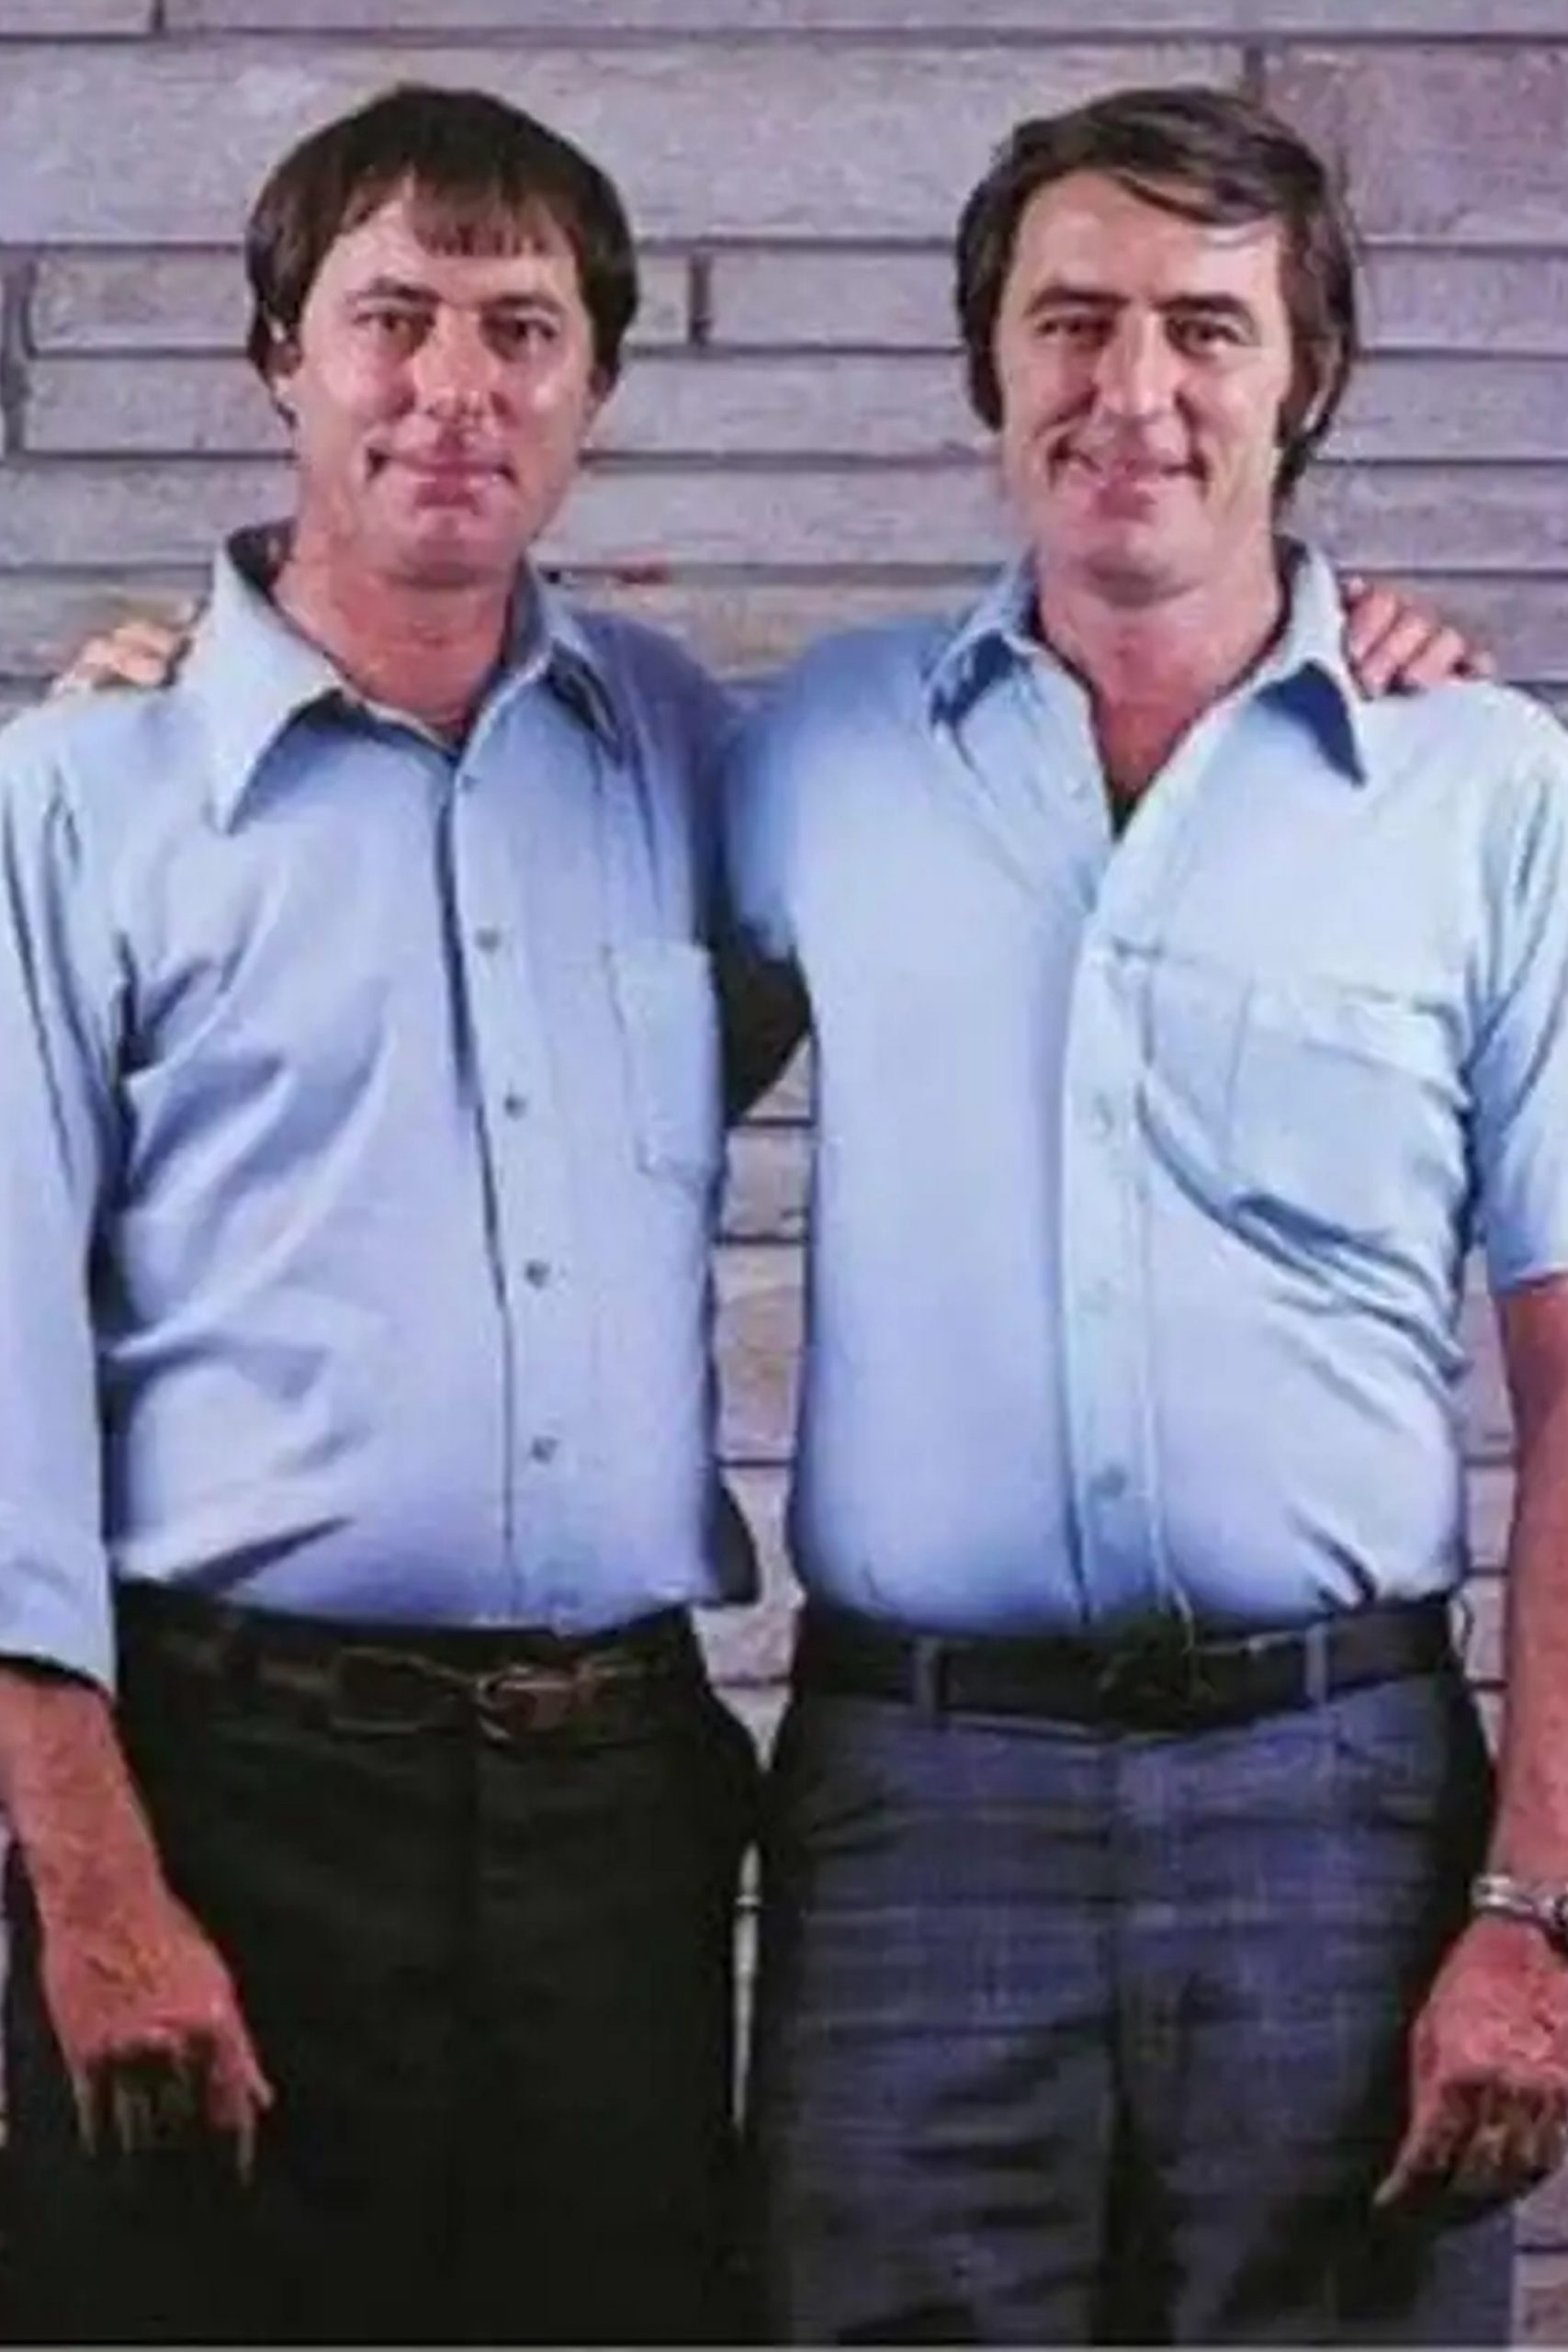 A photo of two male identical twins standing together. Both are wearing blue shirts and dark colored pants.